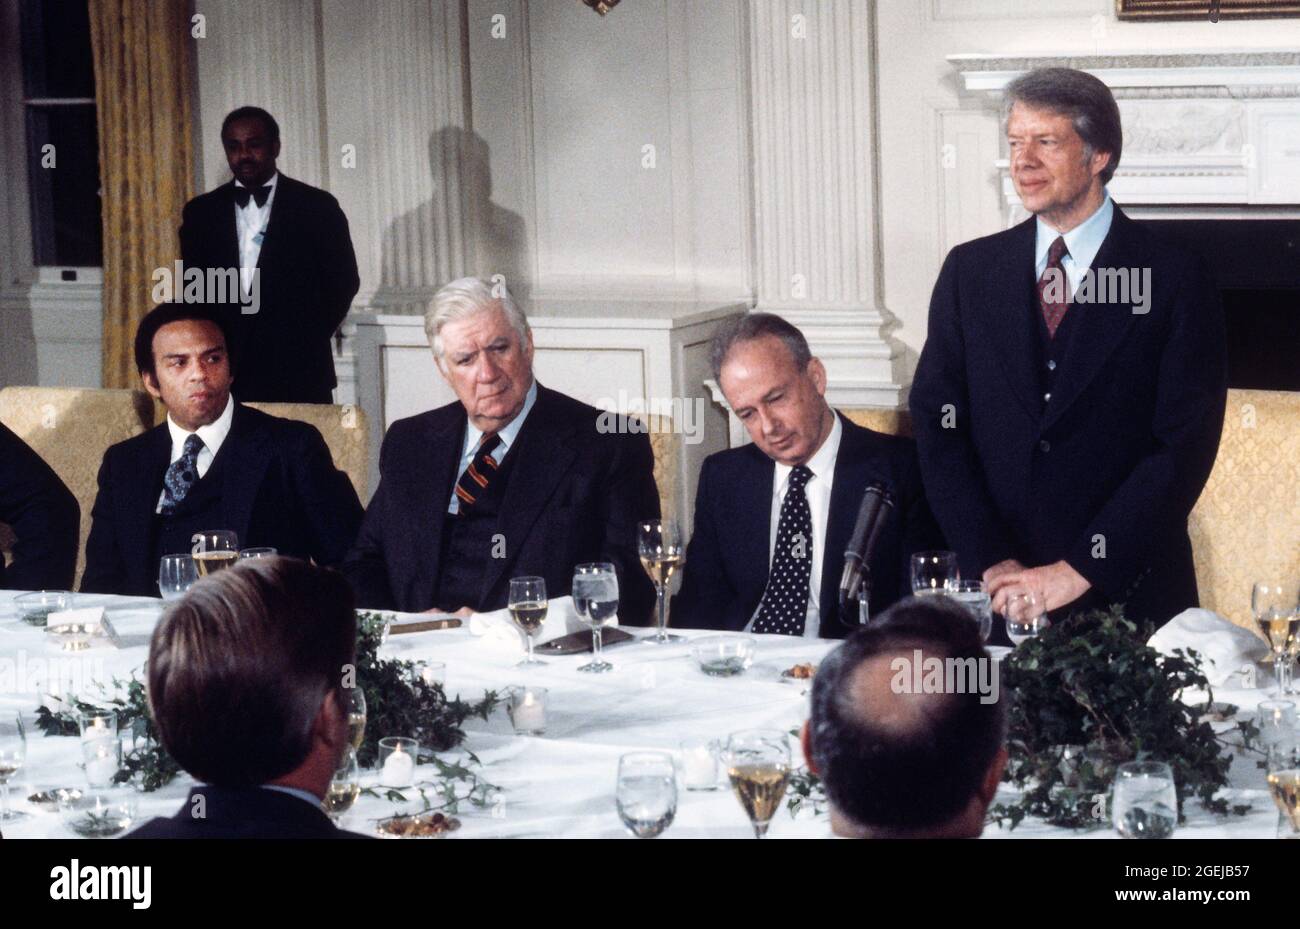 United States President Jimmy Carter, right, offers remarks at a working dinner in honor of Prime Minister Yitzhak Rabin of Israel, right center, in the State Dining Room of the White House in Washington, DC on  Monday, March 7, 1977.  Looking on is Speaker of the US House of Representatives Tip O’Neill (Democrat of Massachusetts), left center, and US Ambassador to the United Nations Andrew Young.Credit: Benjamin E. 'Gene' Forte / CNP /MediaPunch Stock Photo